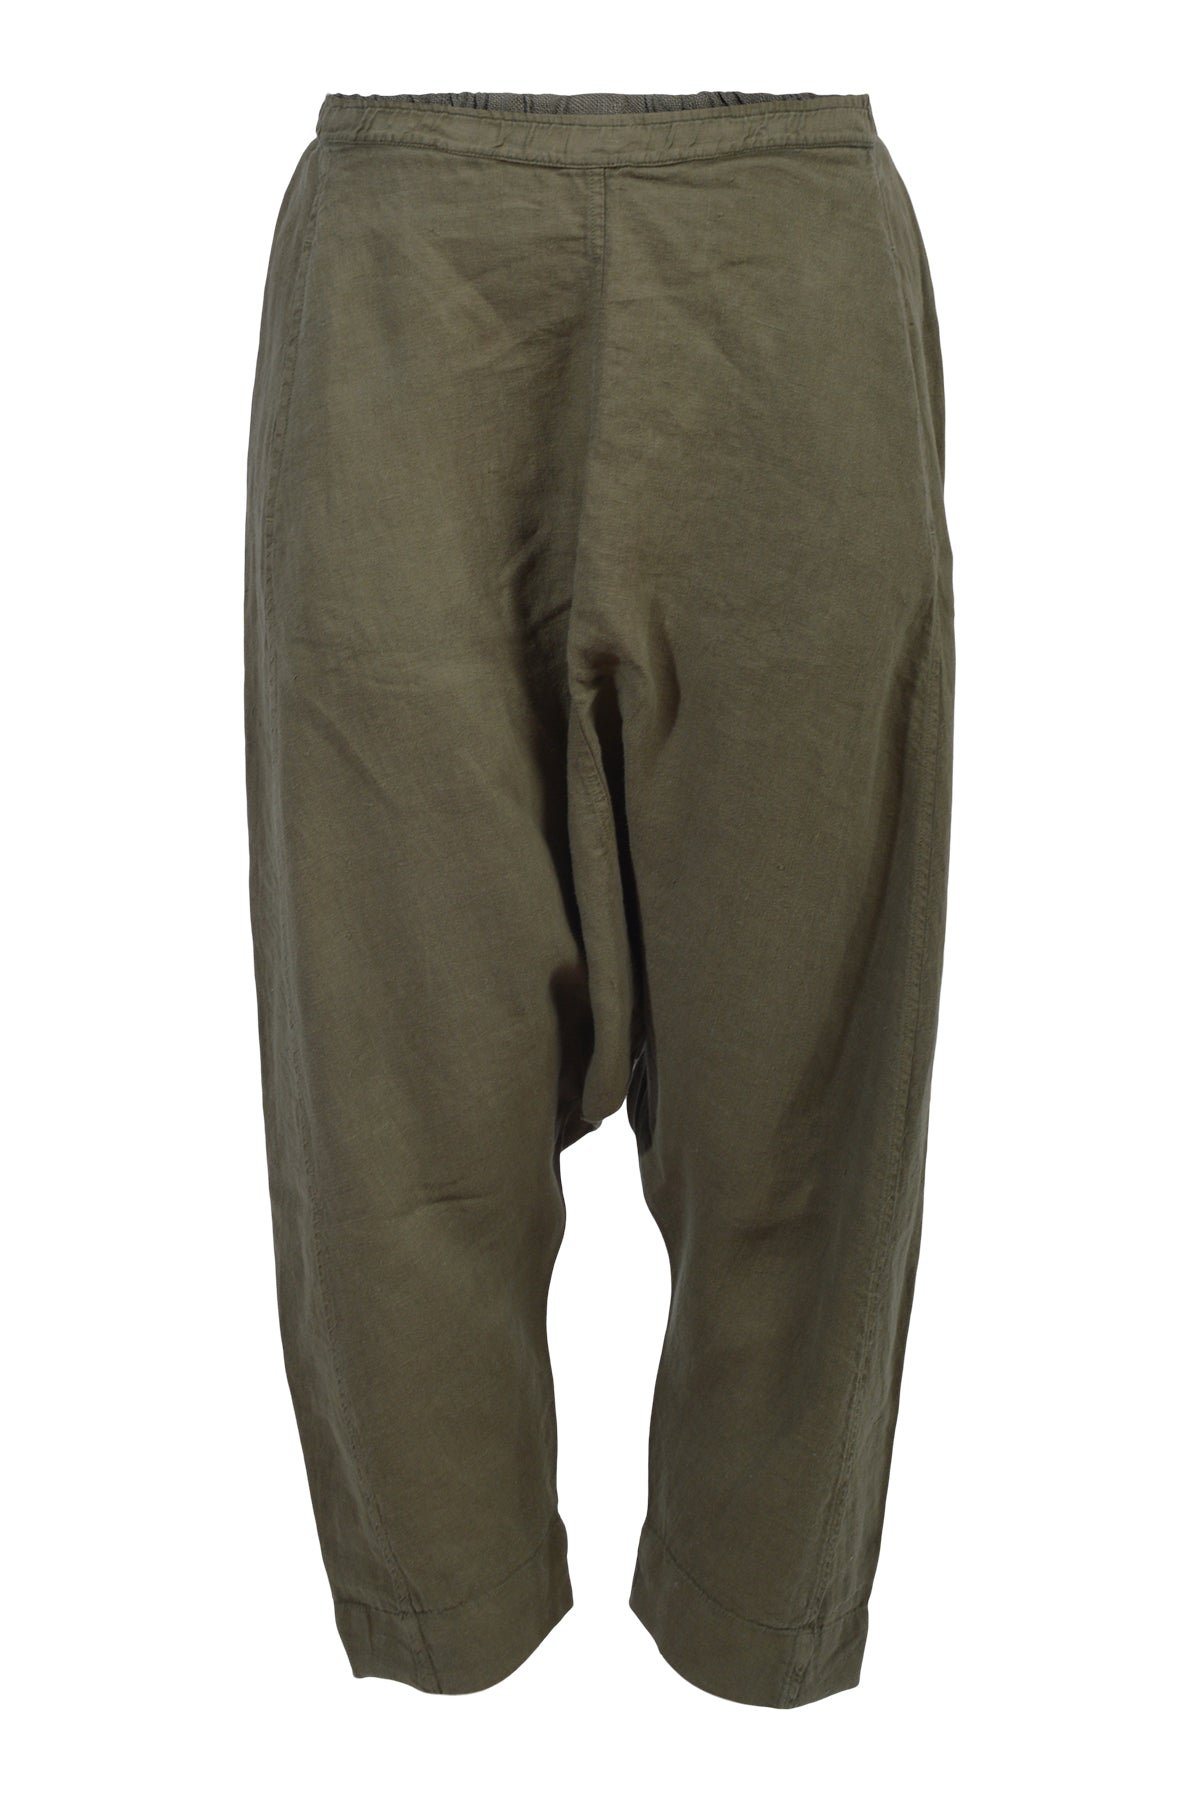 Own by basics harem pants, Capers